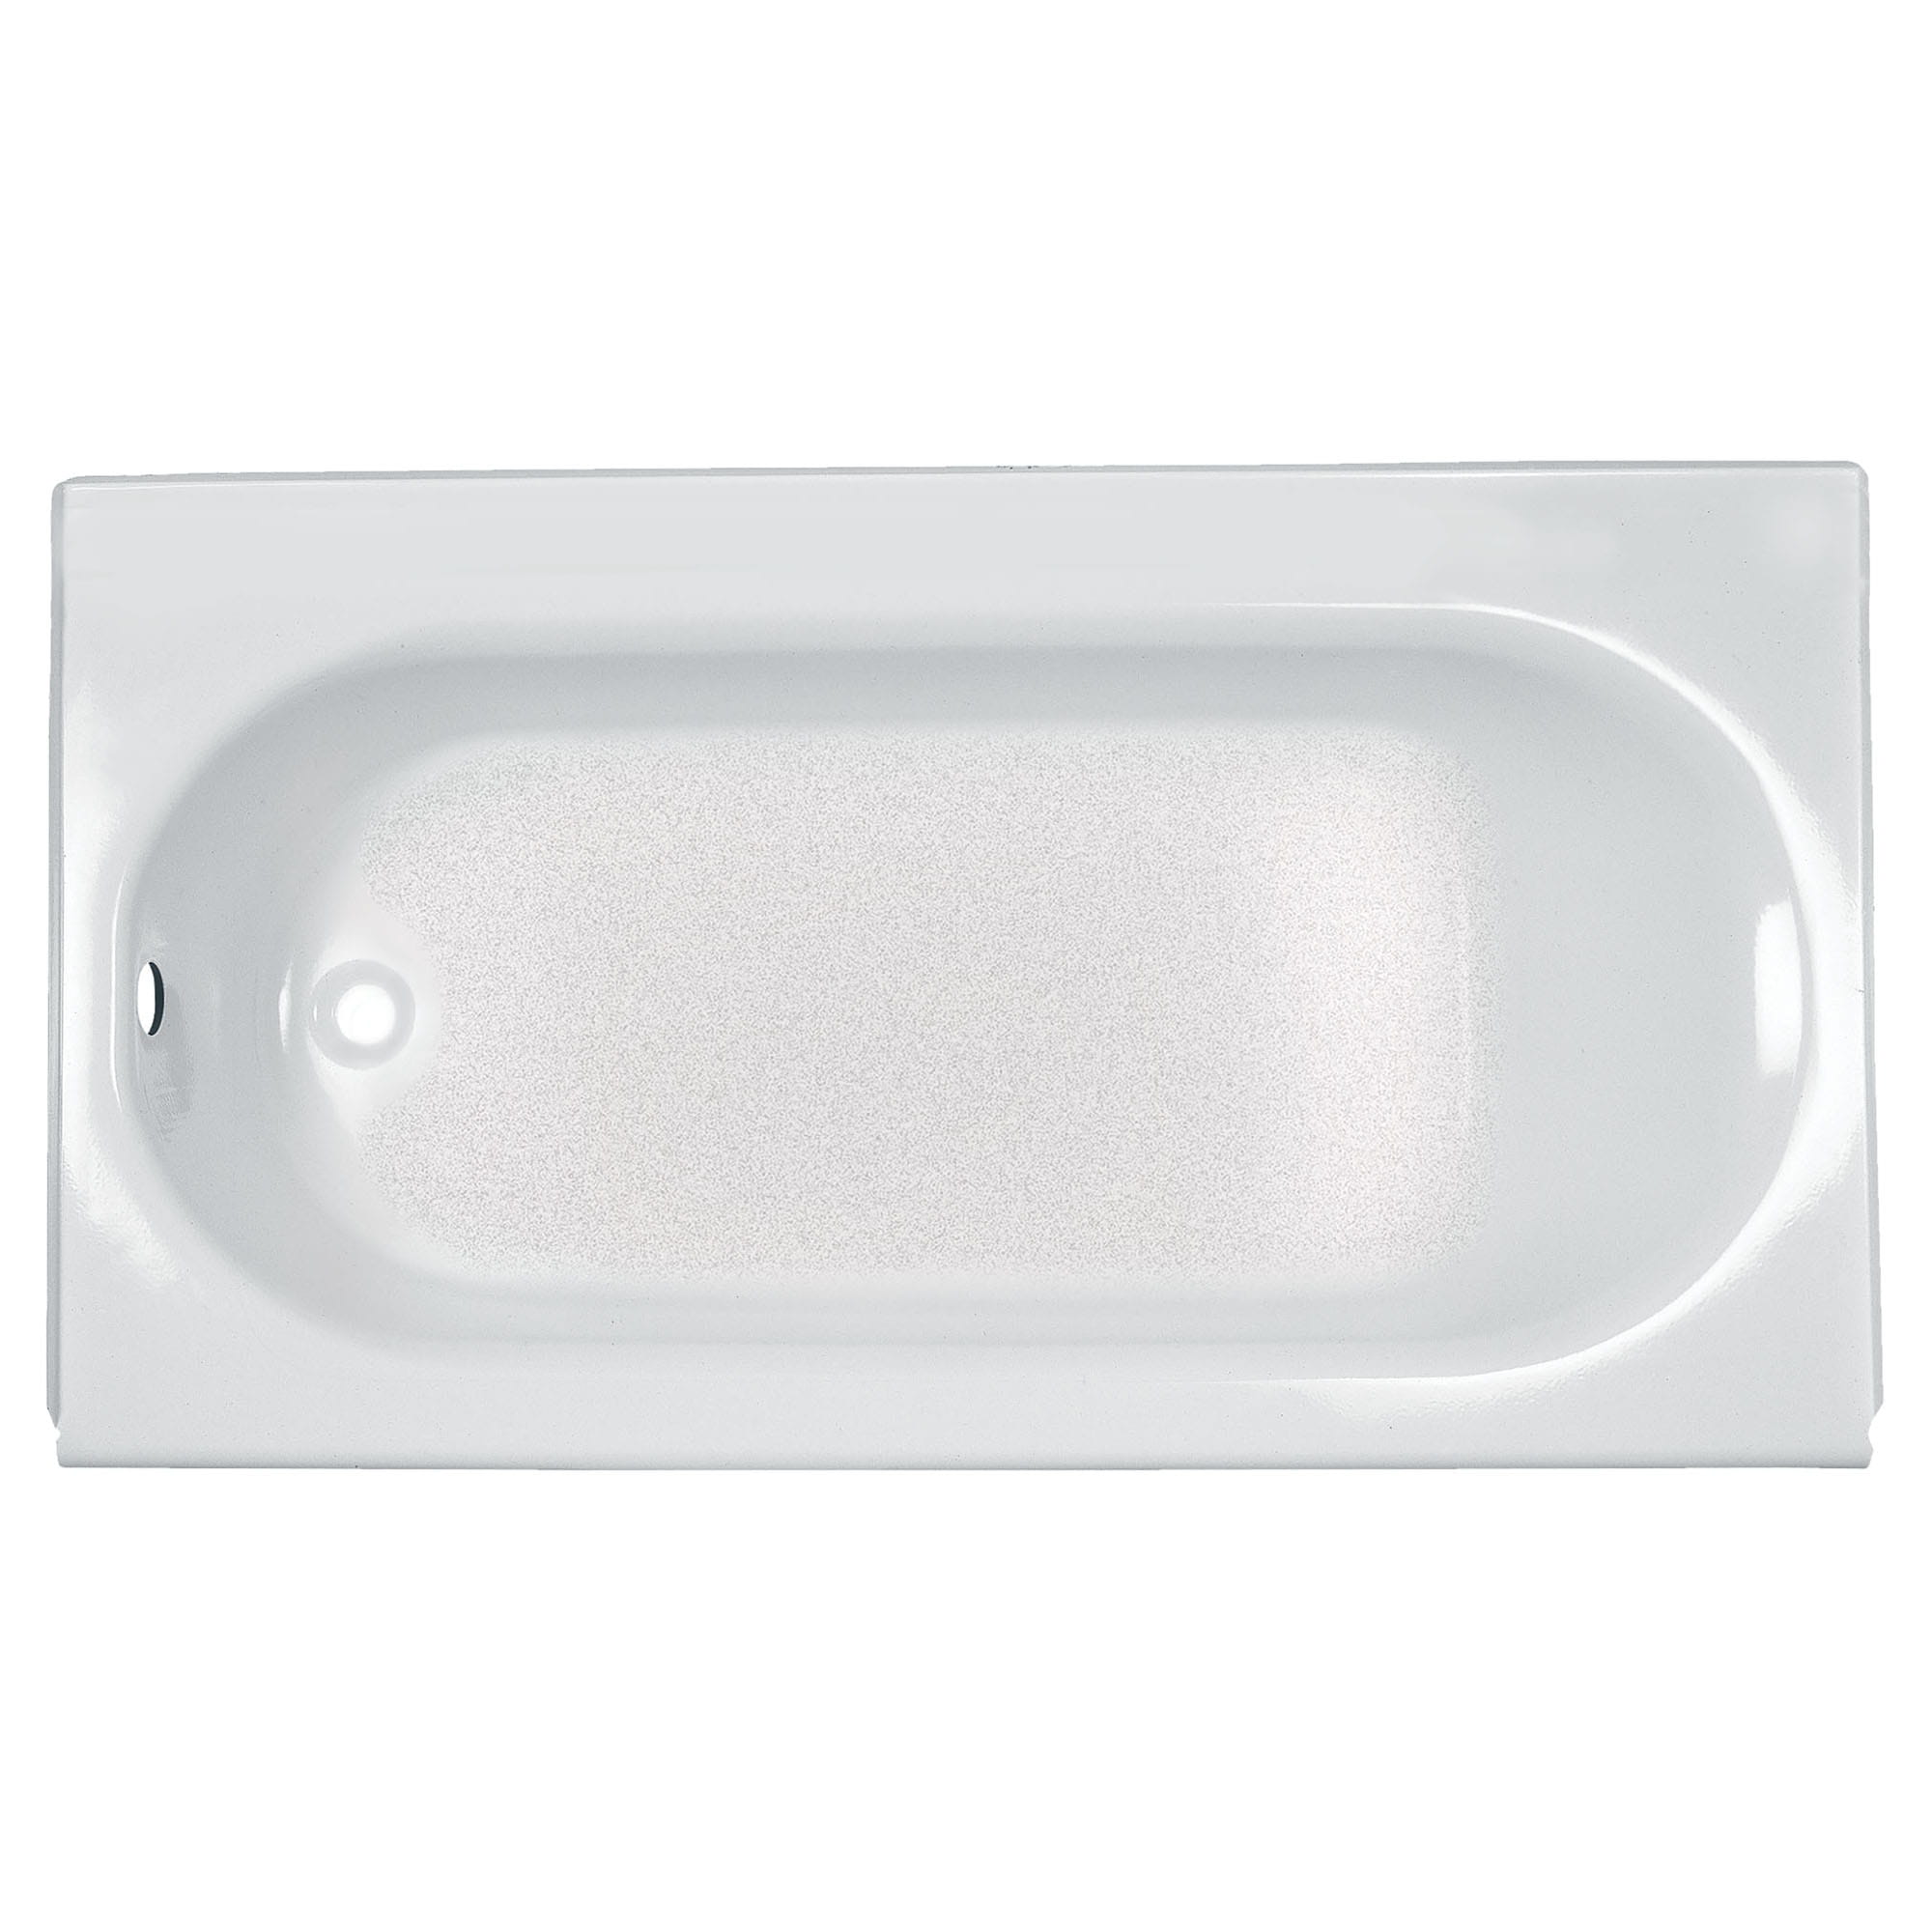 Princeton Americast 60 x 34 Inch Integral Apron Bathtub Above Floor Rough Left Hand Outlet with Luxury Ledge WHITE